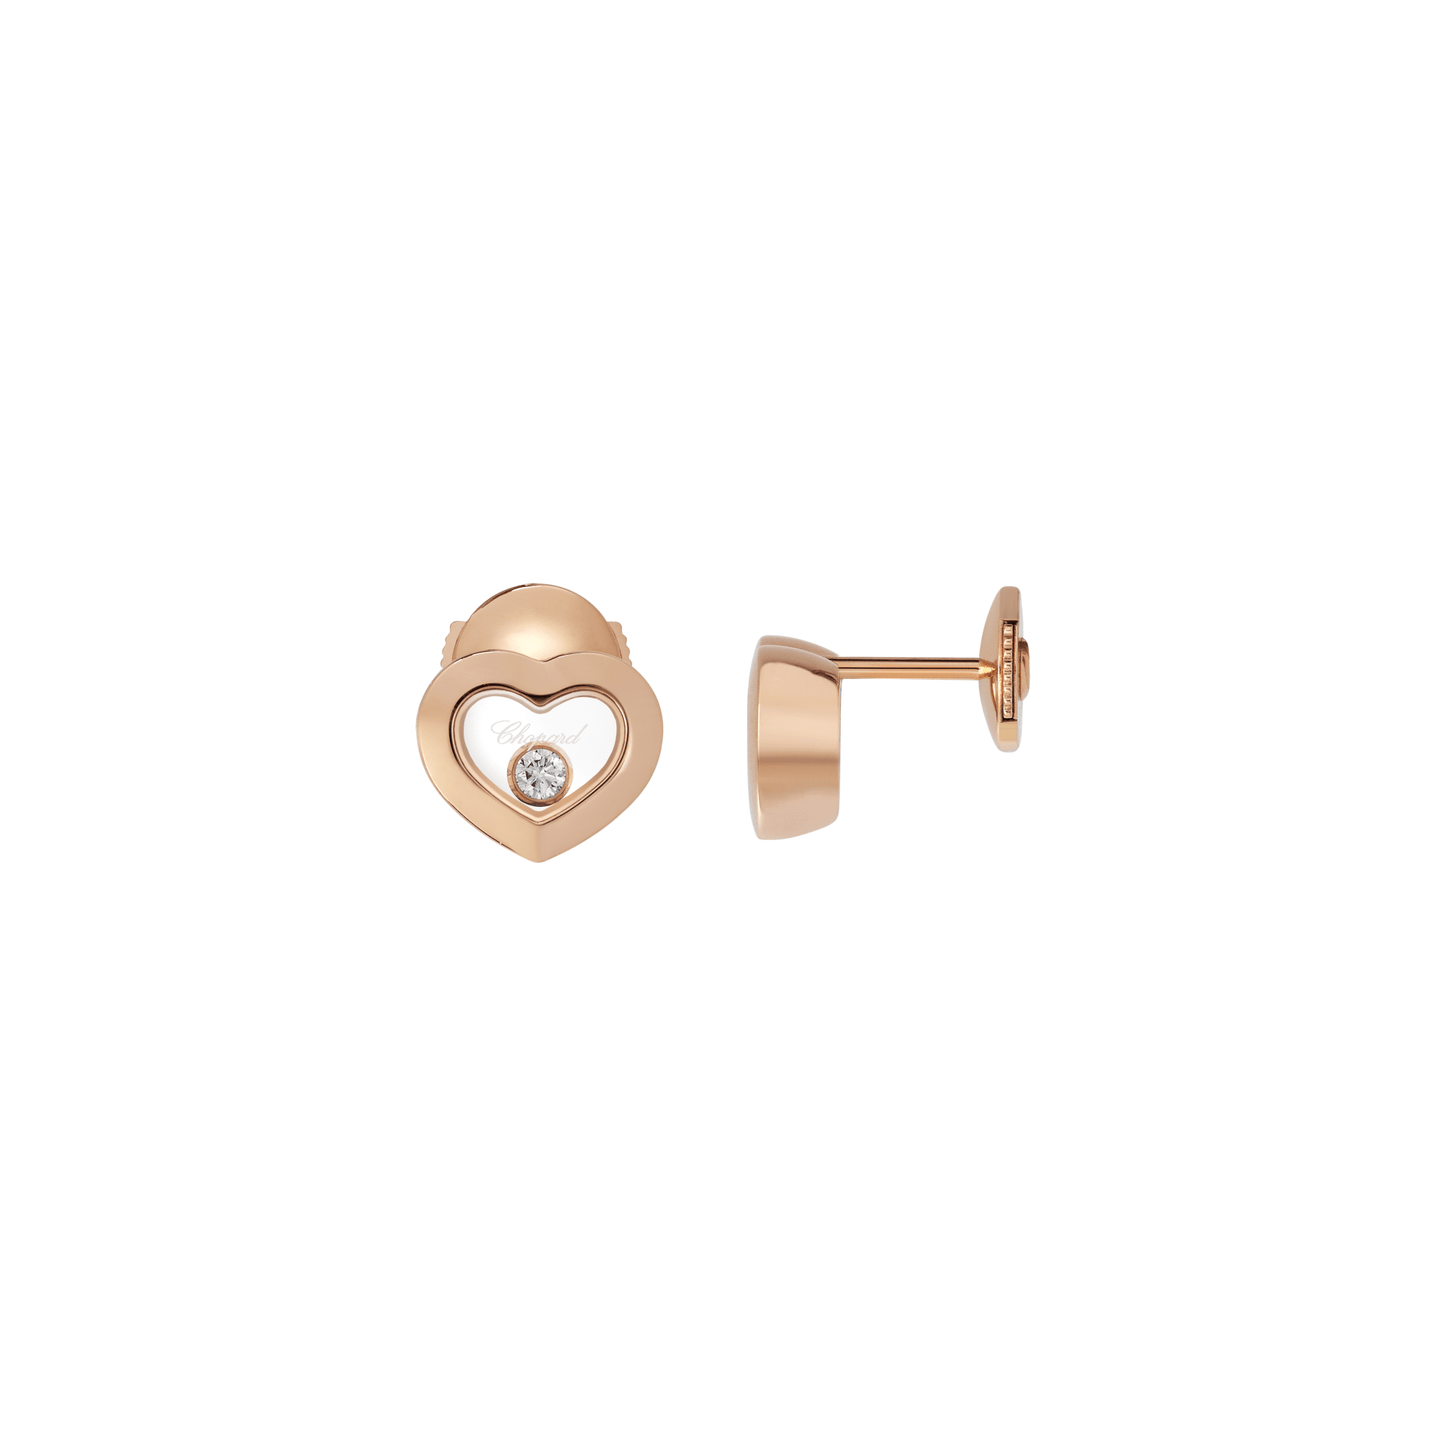 HAPPY DIAMONDS ICONS EARRINGS, ETHICAL ROSE GOLD, DIAMONDS 83A054-5001